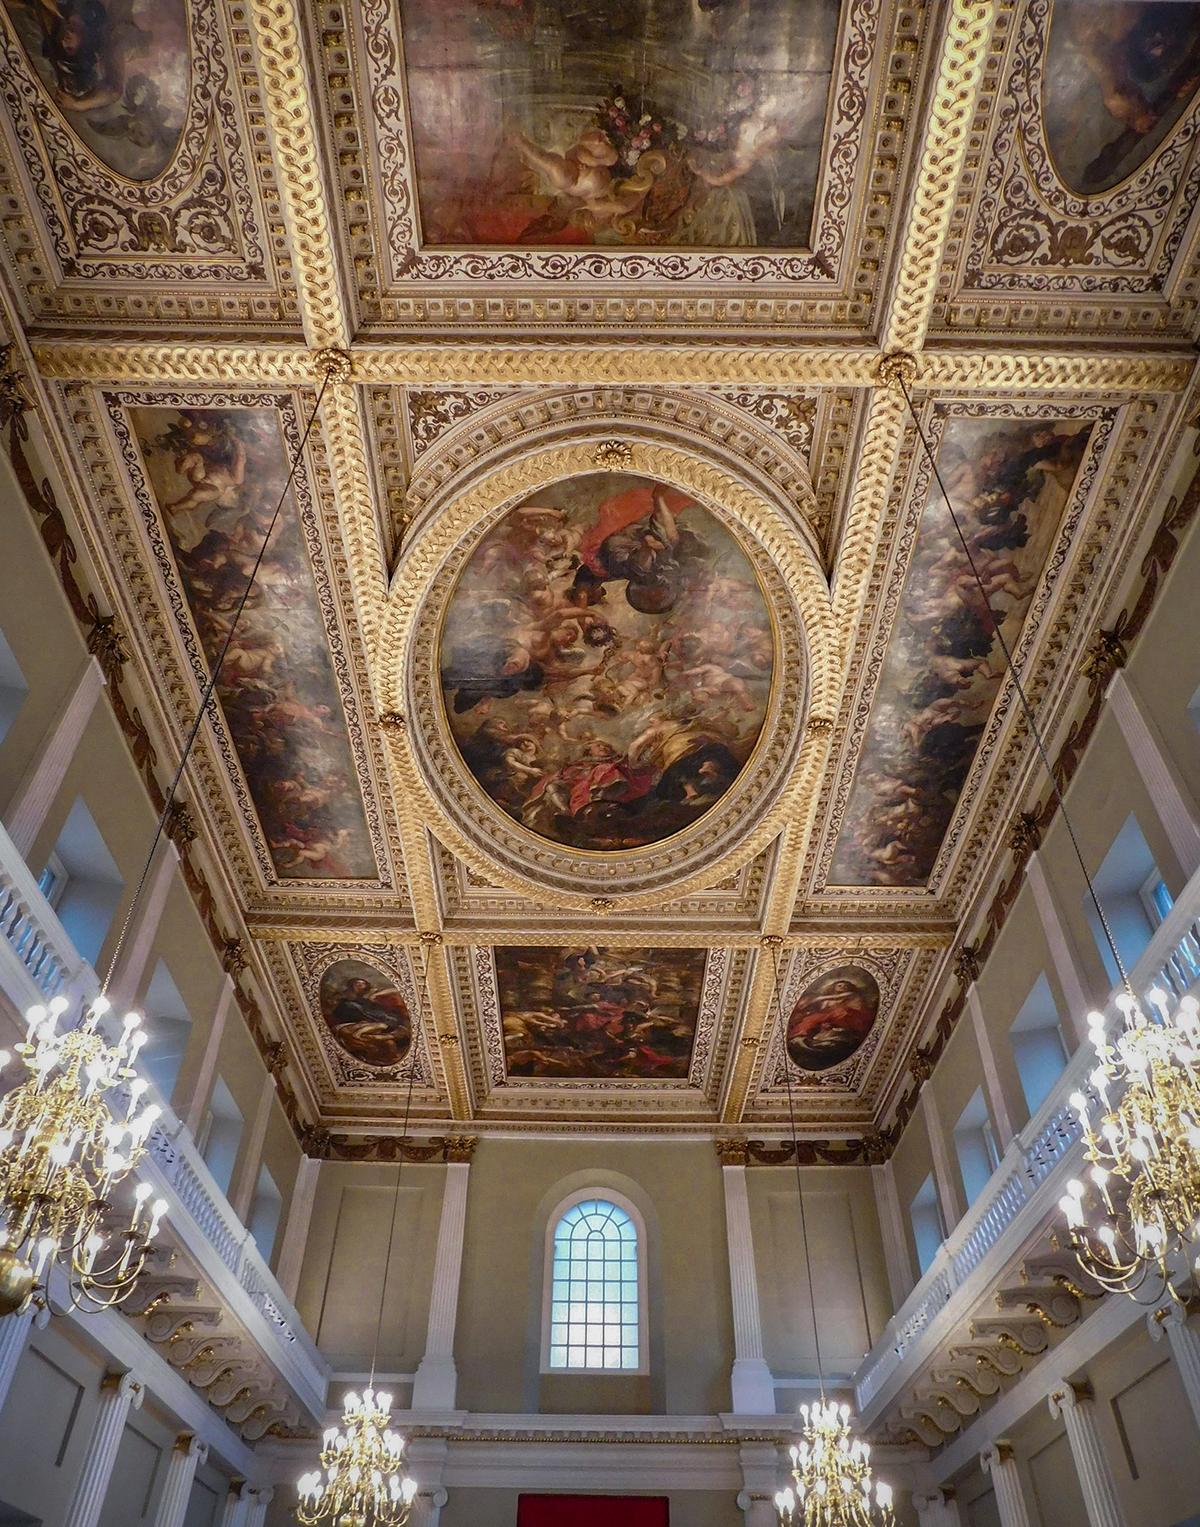 The ceiling of the Banqueting House with 10 paintings by Flemish artist Peter Paul Rubens. (Color corrected photograph by <a class="new" title="User:Paul the Archivist (page does not exist)" href="https://commons.wikimedia.org/w/index.php?title=User:Paul_the_Archivist&action=edit&redlink=1">Paul the Archivist</a>/<a href="https://creativecommons.org/licenses/by-sa/4.0/deed.en">CC BY-SA 4.0 DEED</a>)